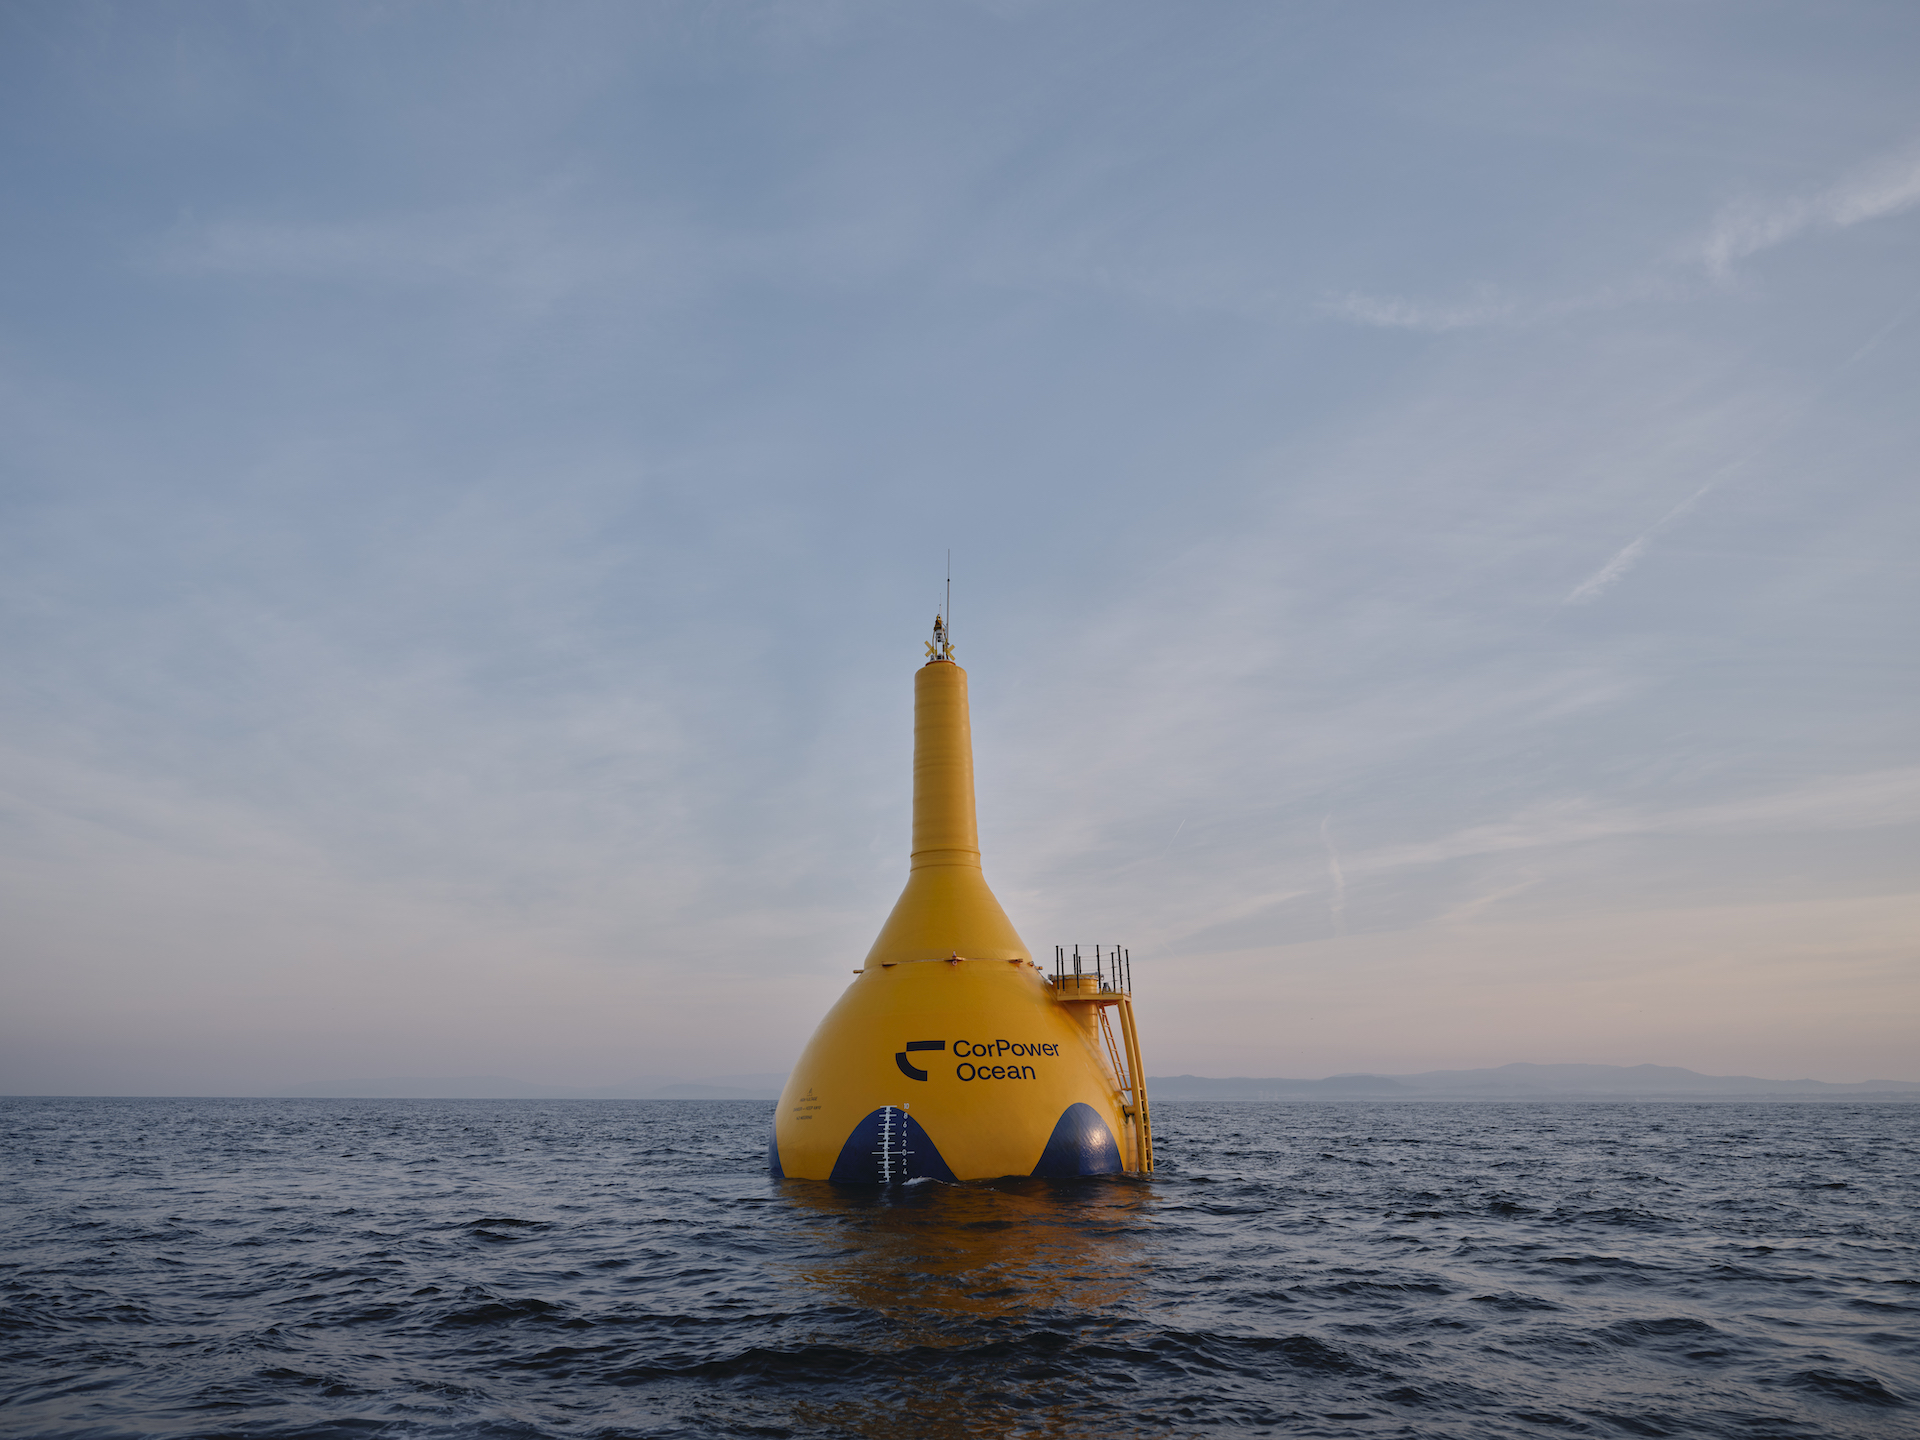 Breakthrough for global wave energy following CorPower Ocean commissioning